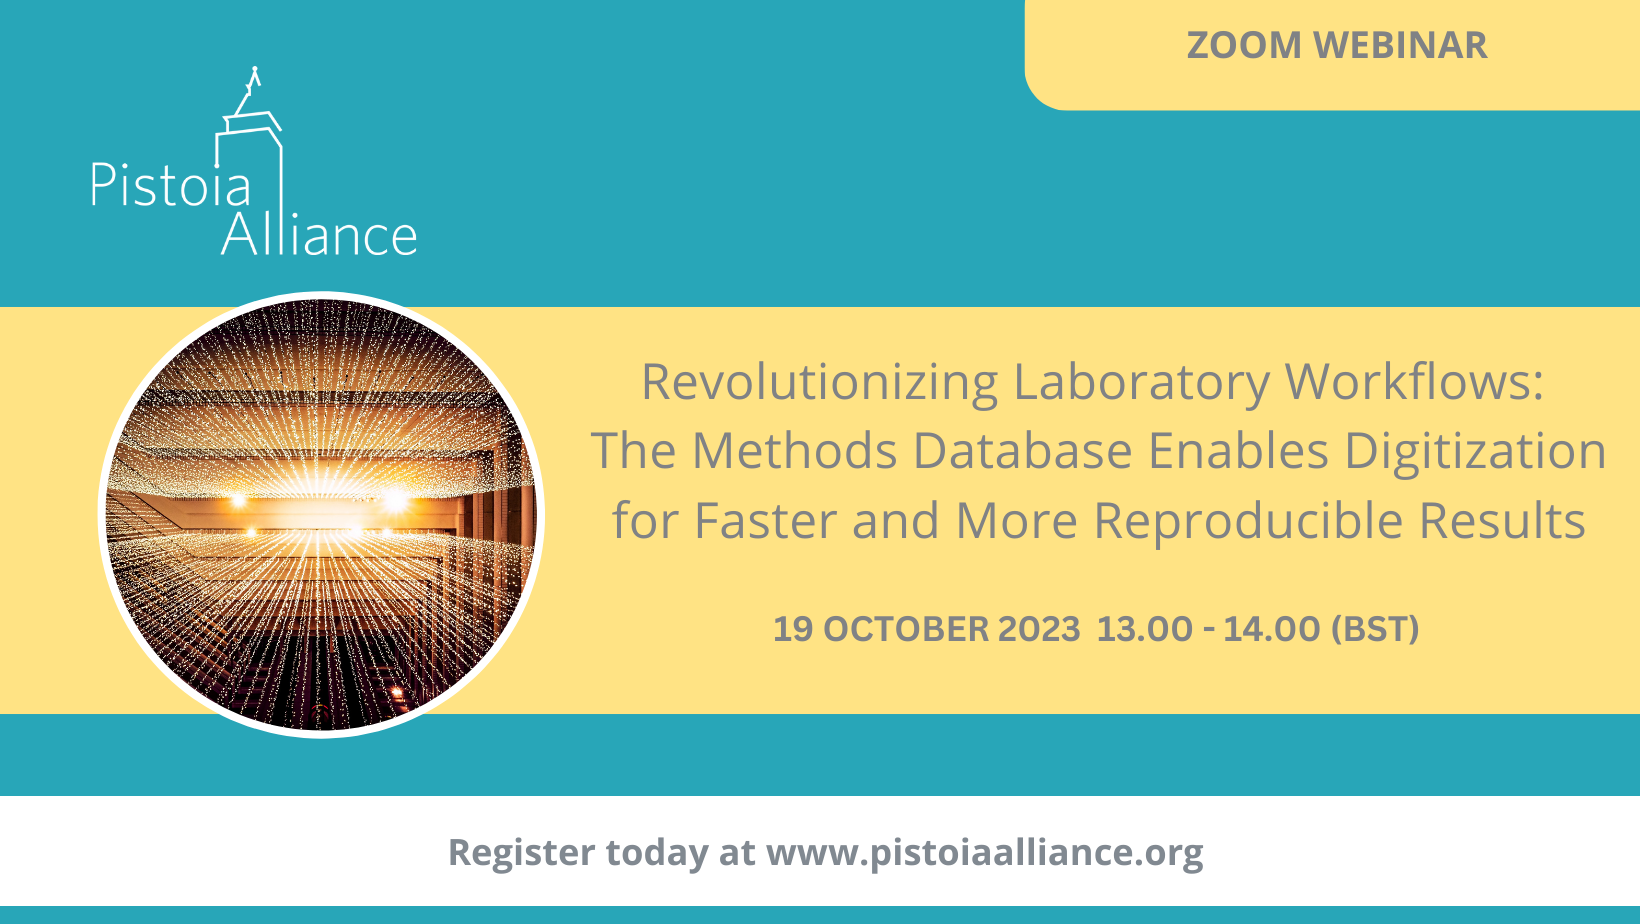 Revolutionizing Laboratory Workflows: The Methods Database Enables Digitization for Faster and More Reproducible Results